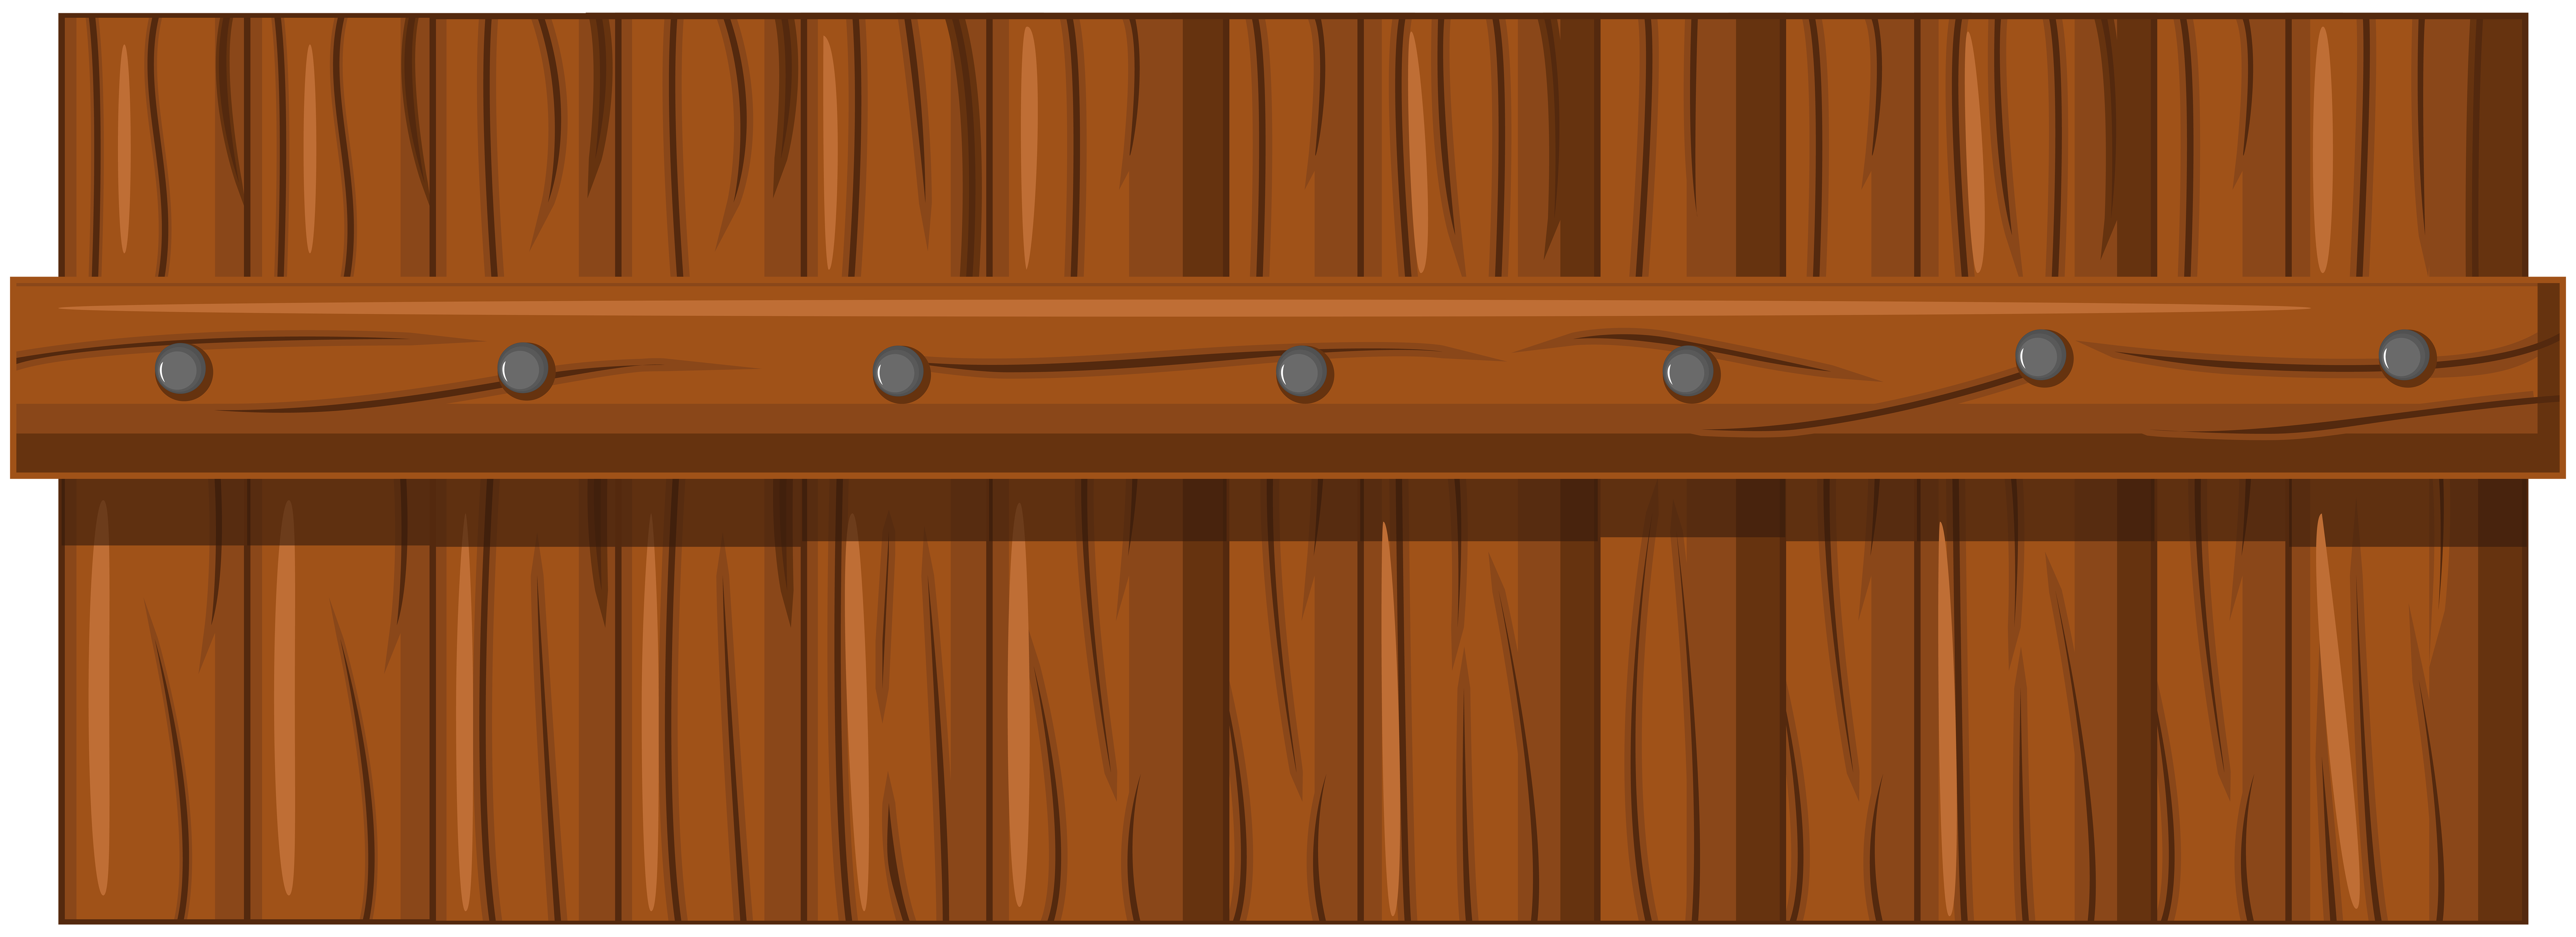 fence clipart wooden fence